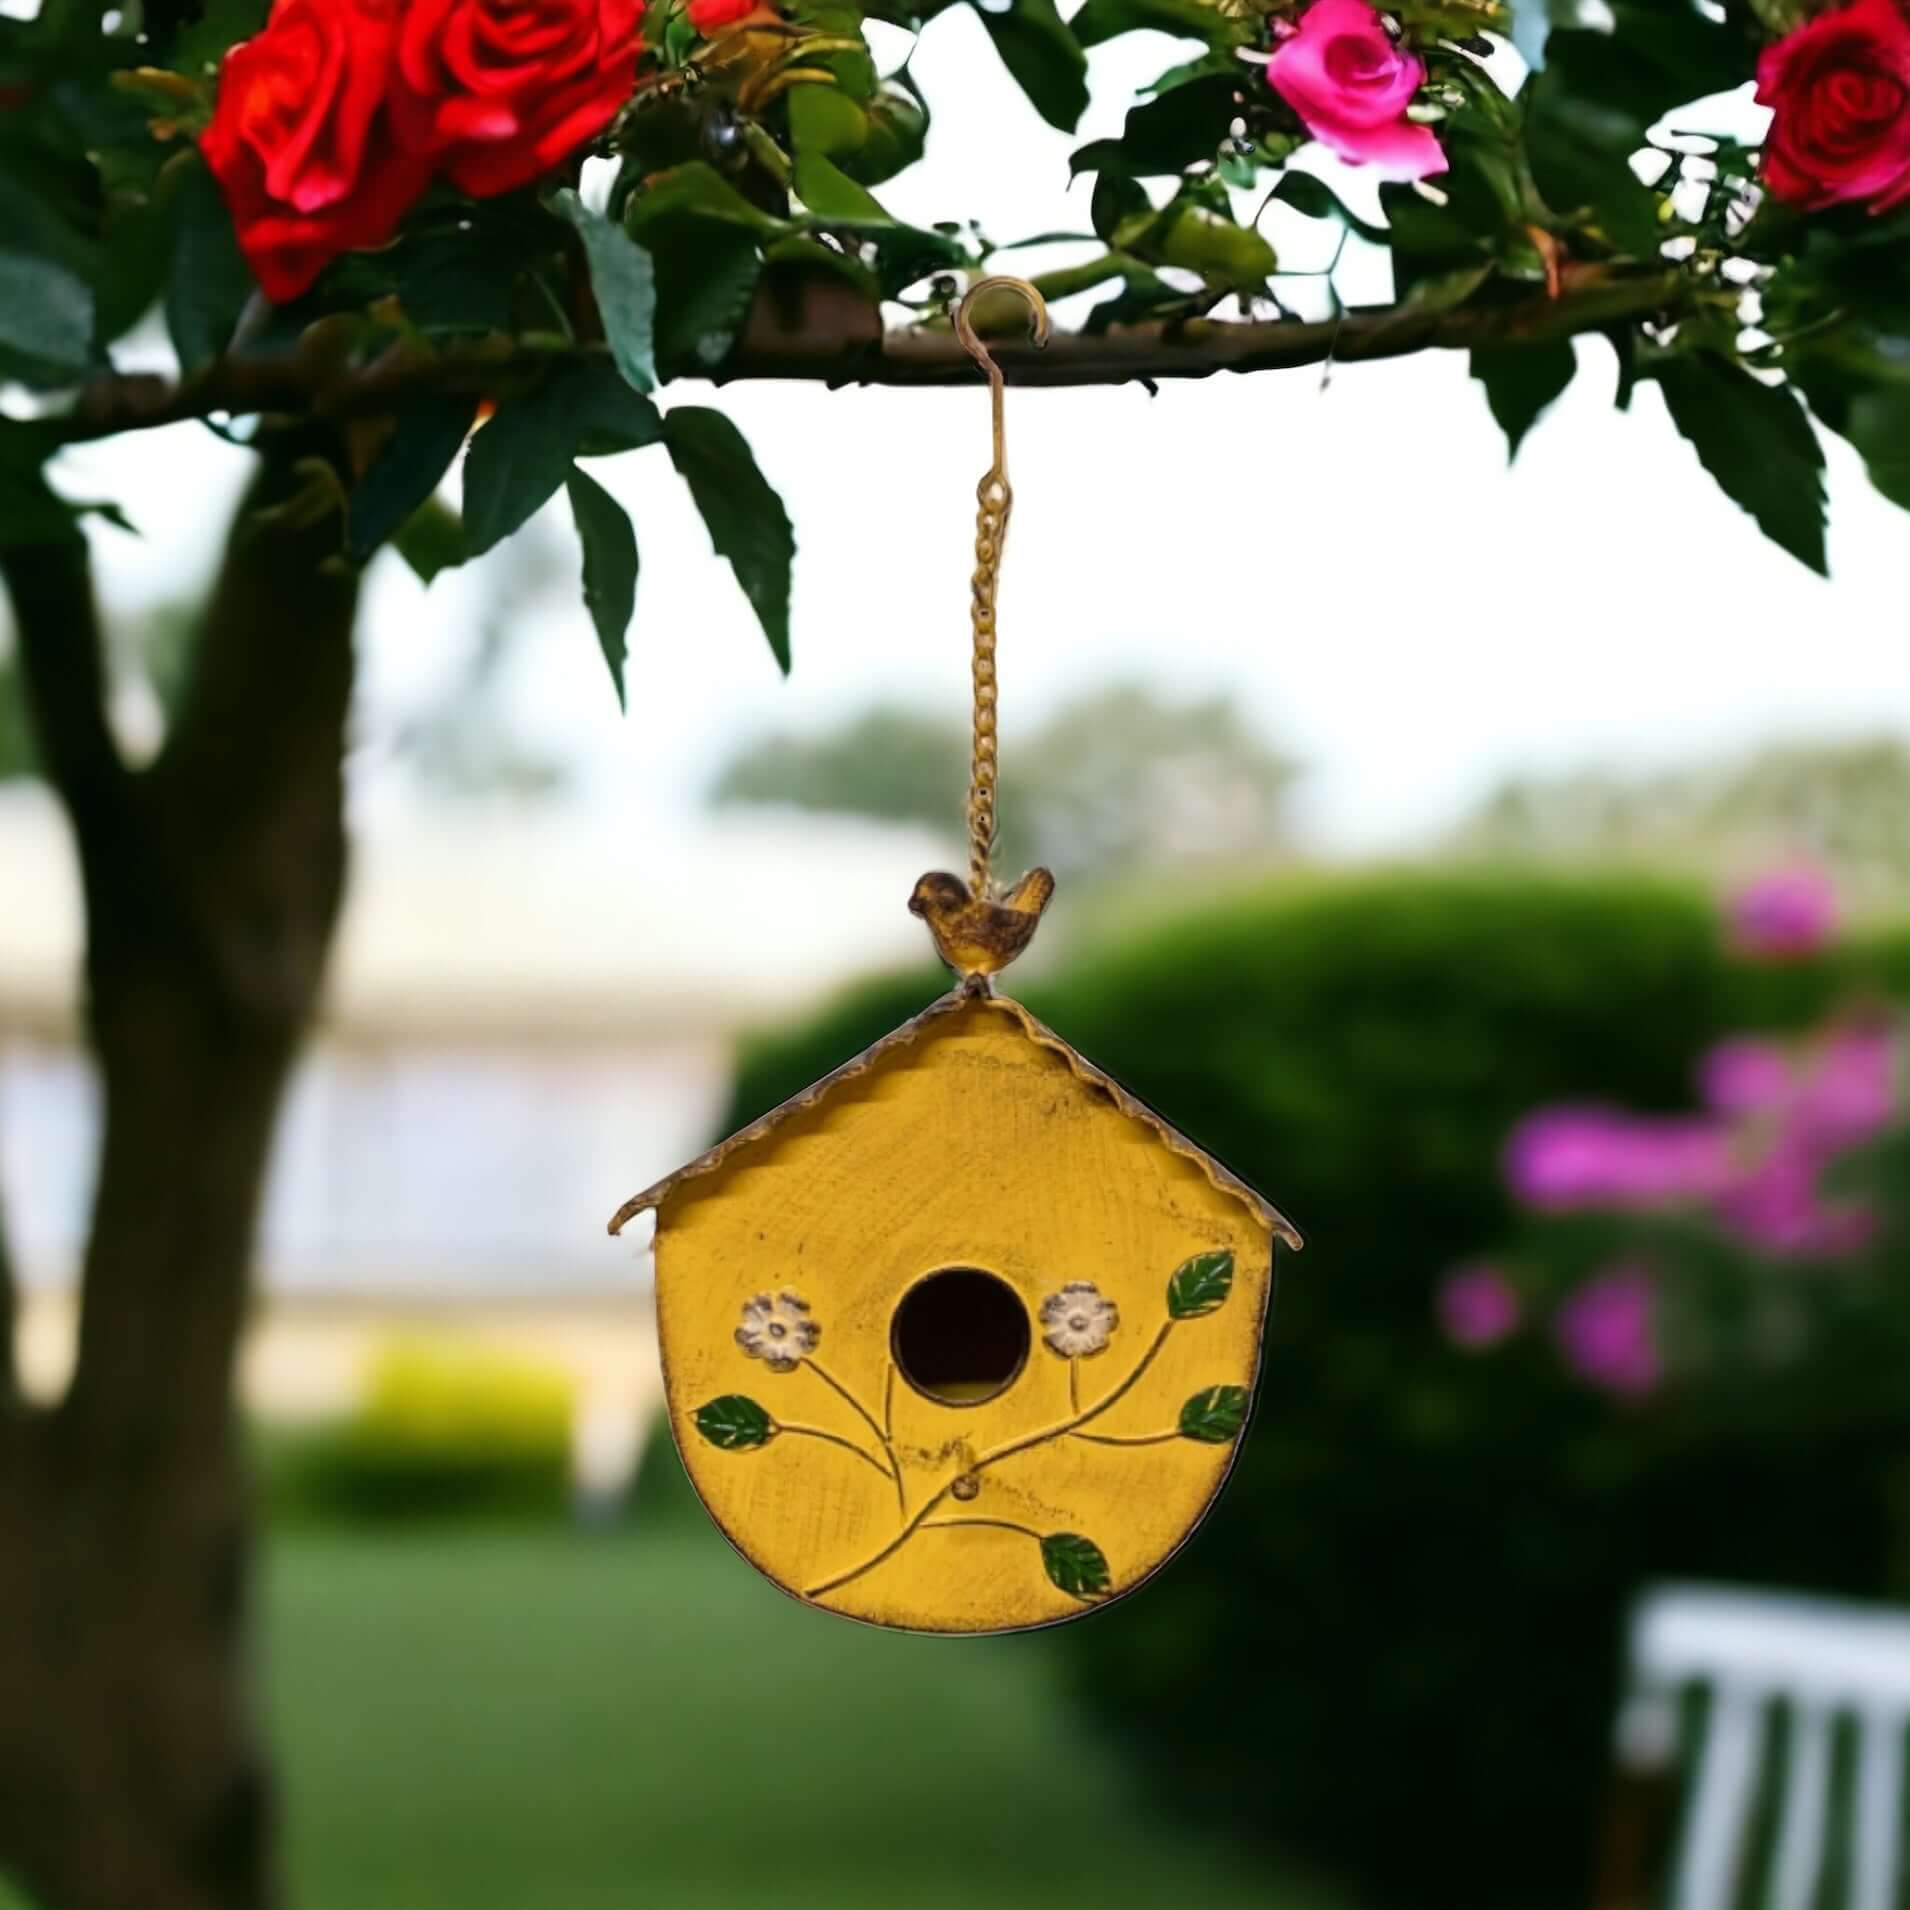 Bird House Birdhouse Vintage Yellow - The Renmy Store Homewares & Gifts 